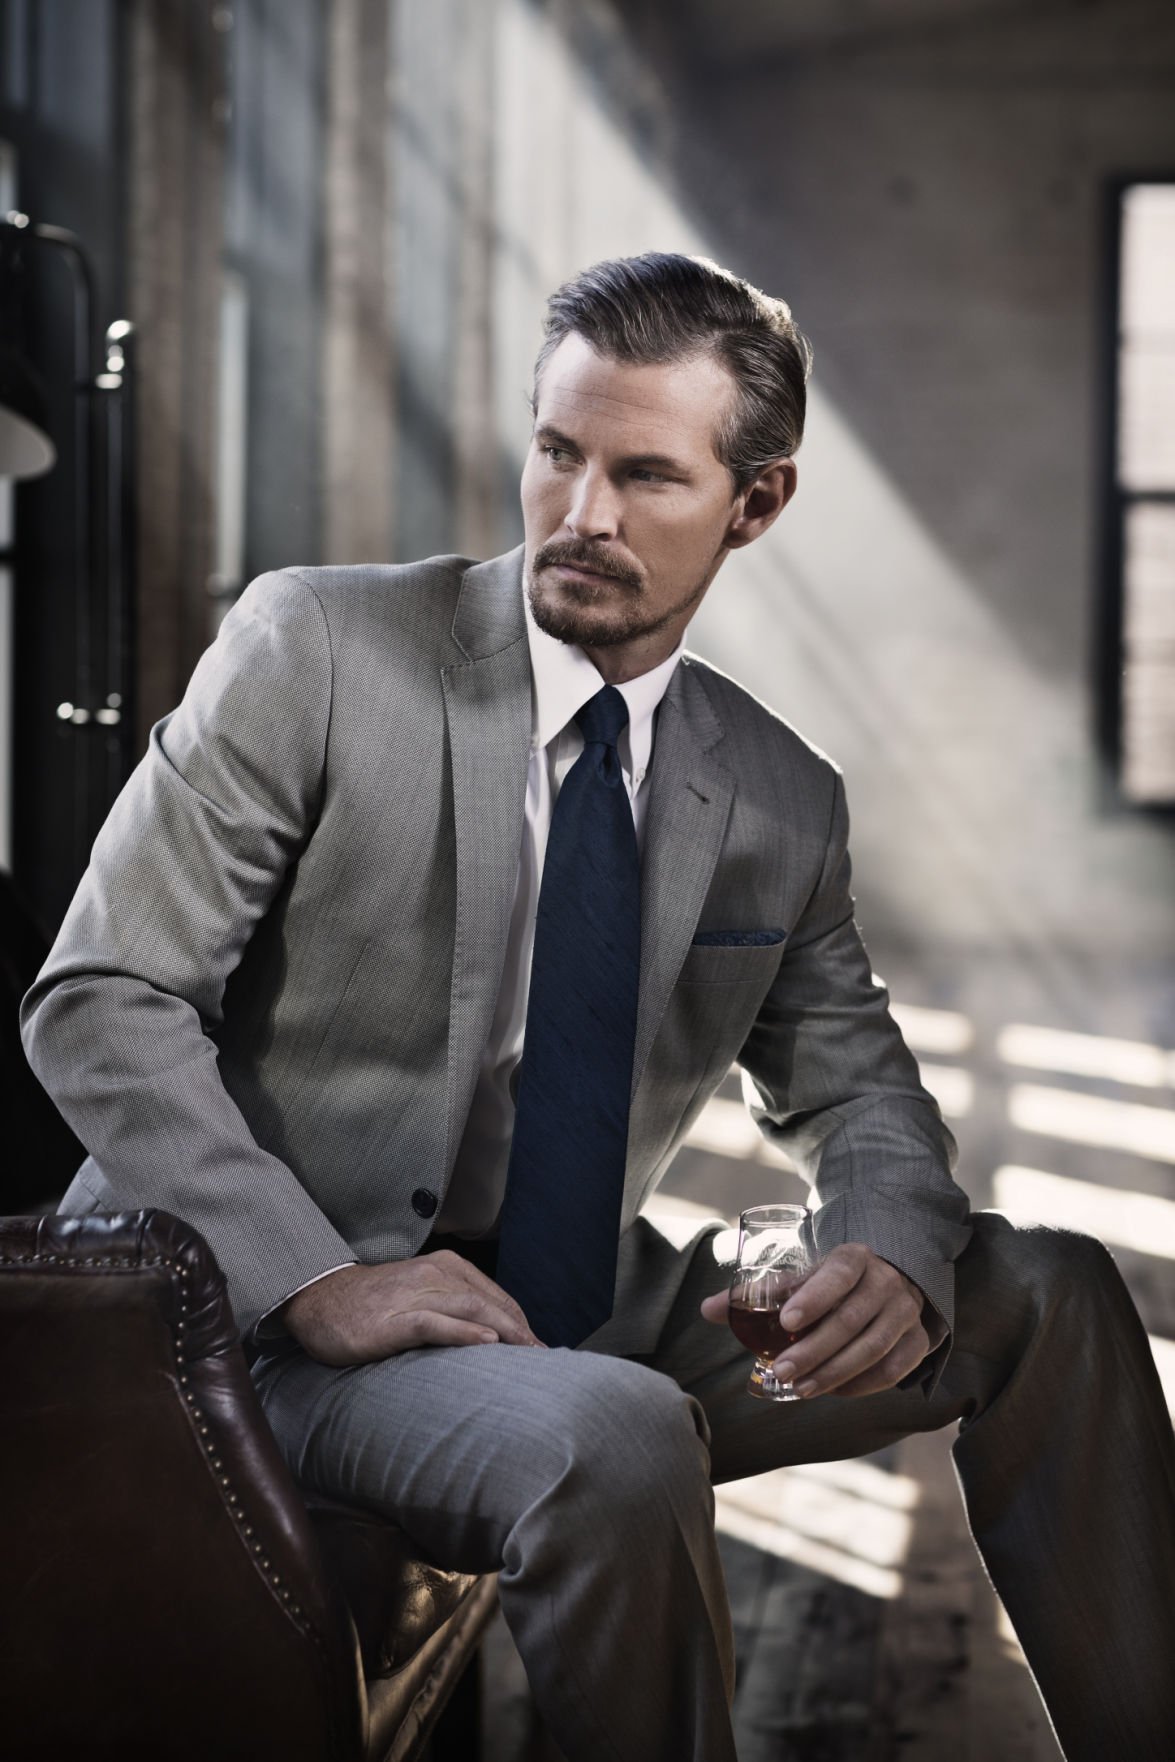 Tradition meets originality with these men's fashions | Fashion ...